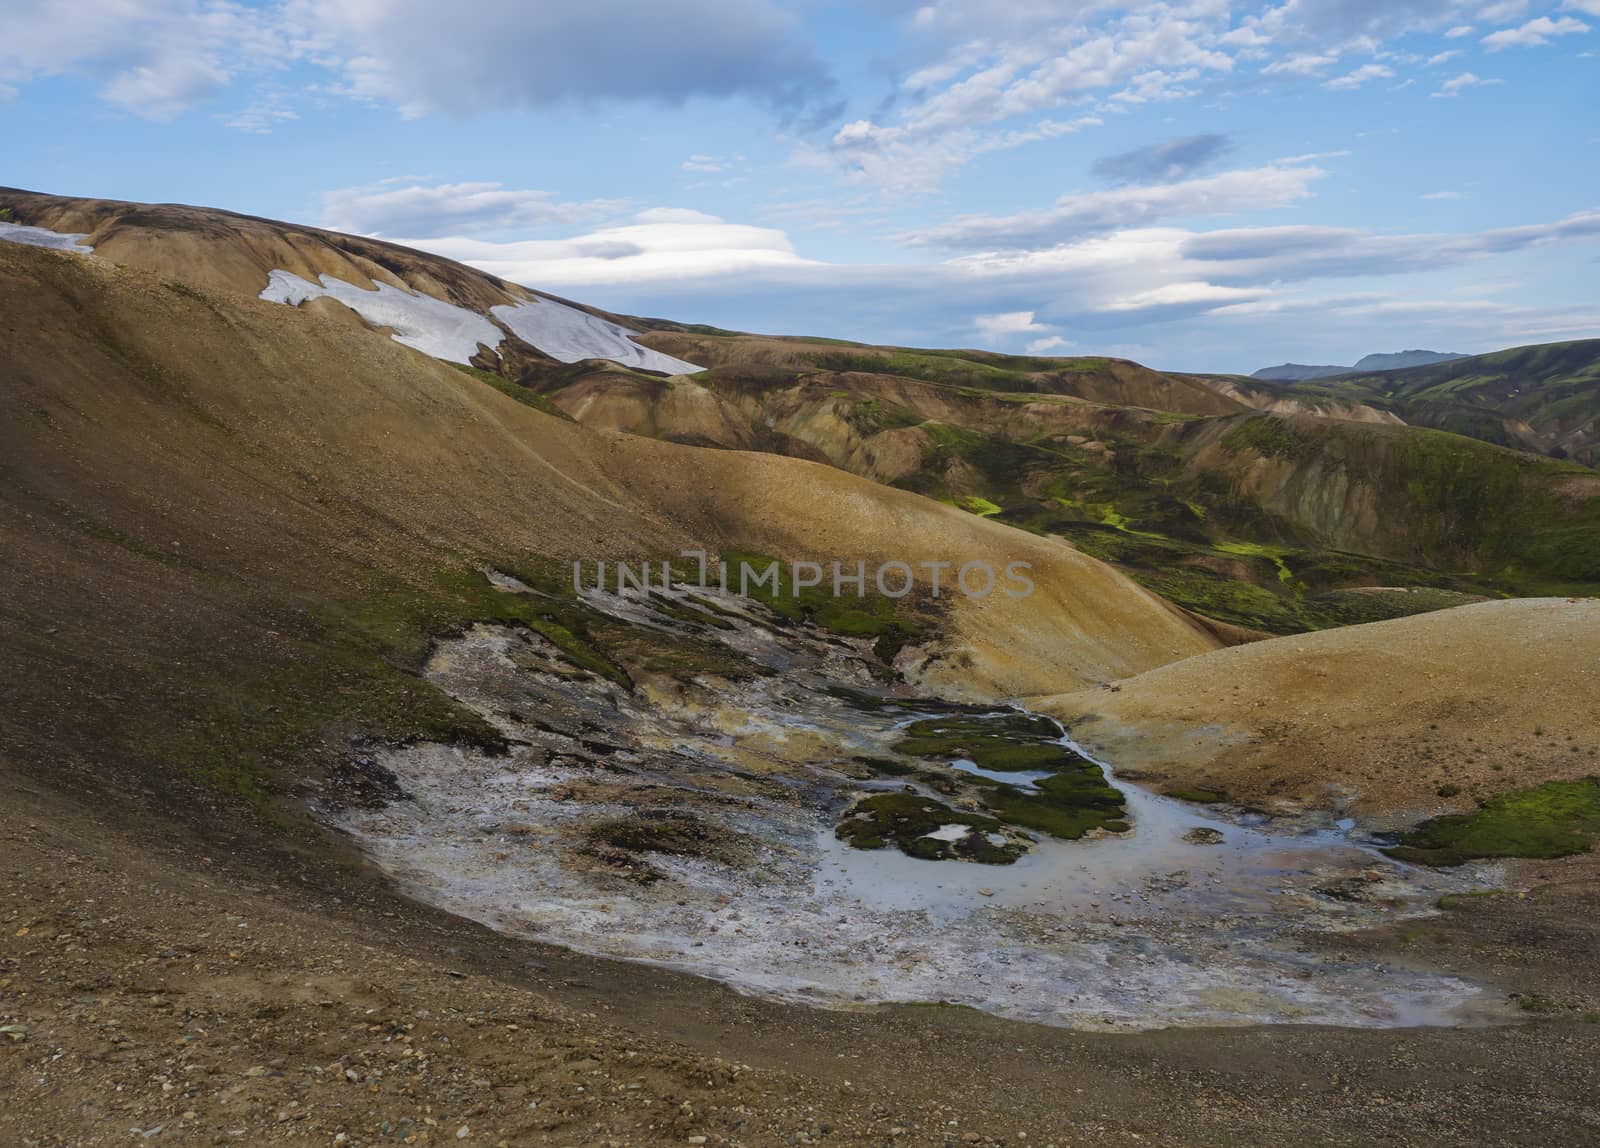 Panorma of Colorful Rhyolit Landmannalaugar mountain with multicolored volcanos and sulphur lake with geothermal fumarole at Fjallabak Nature Reserve in Highlands of Iceland